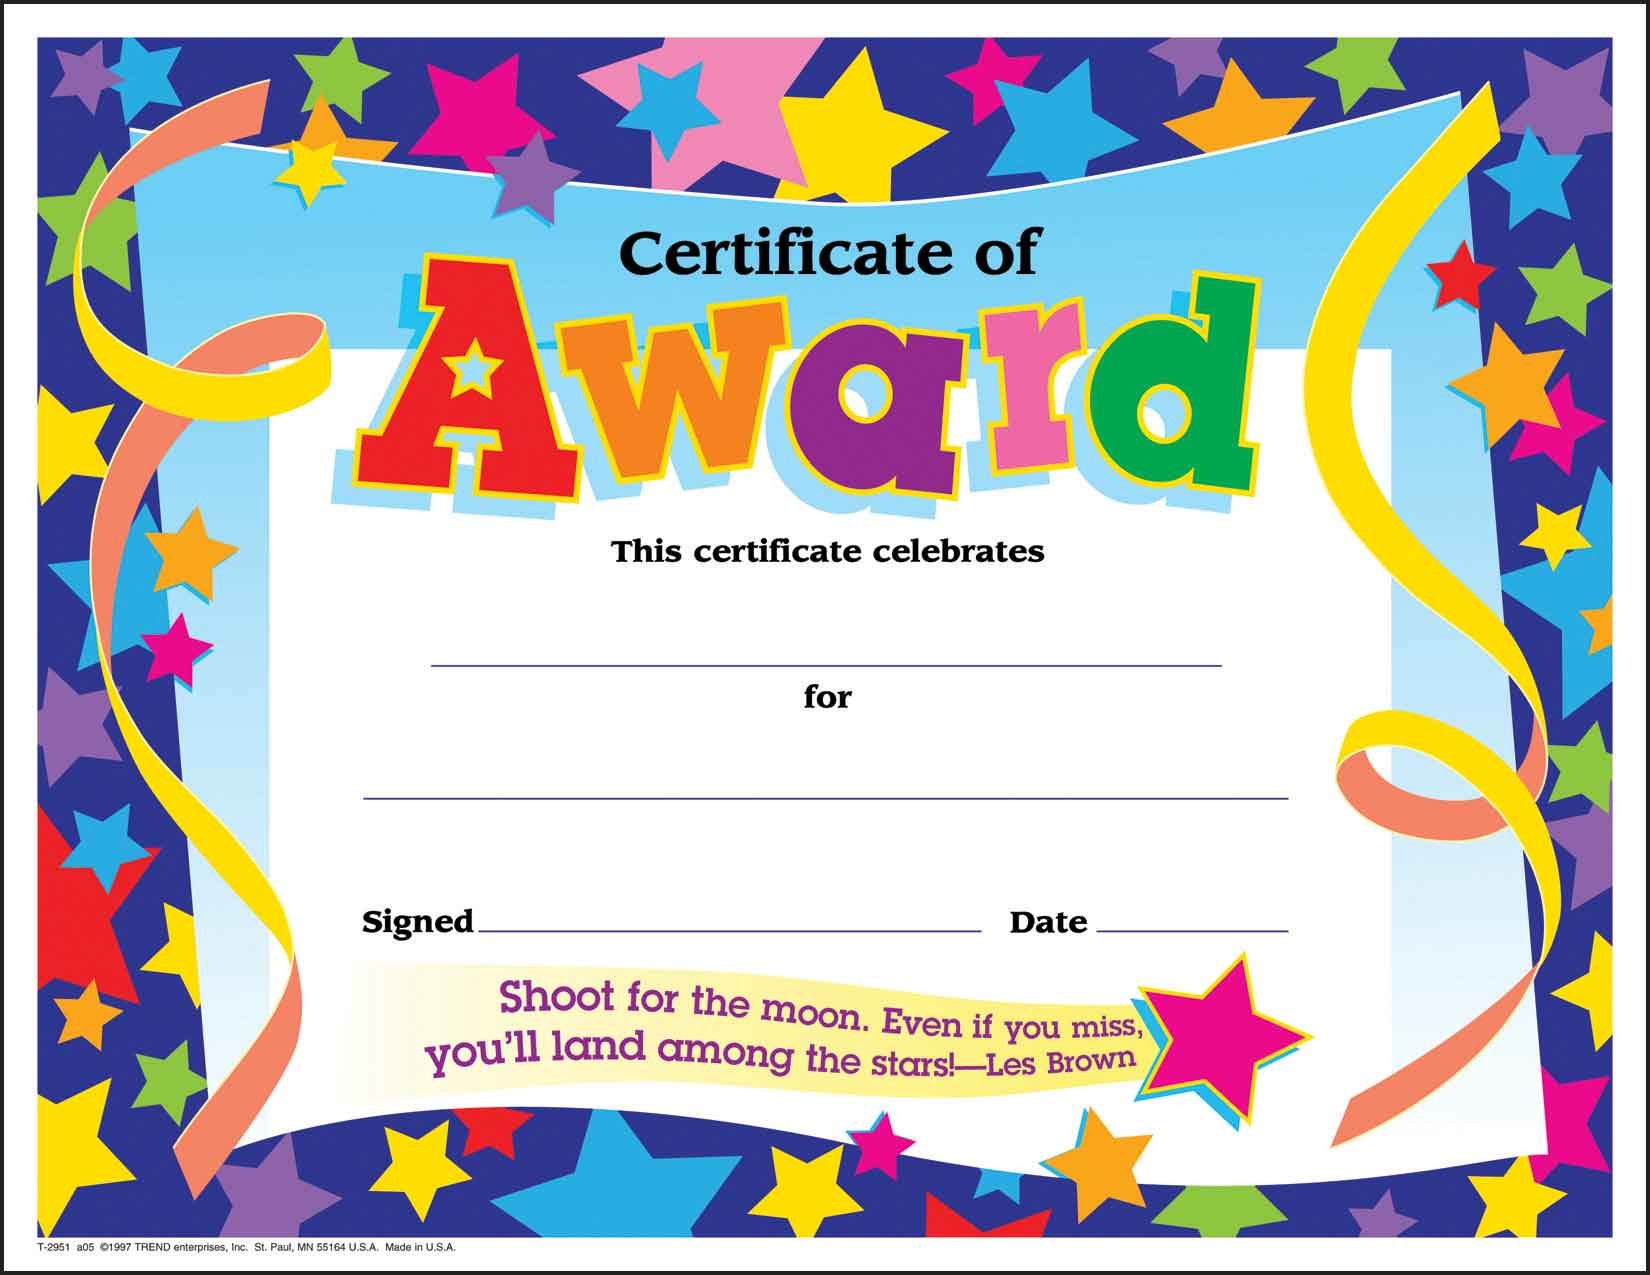 Congratulations Certificate Template from clipart-library.com